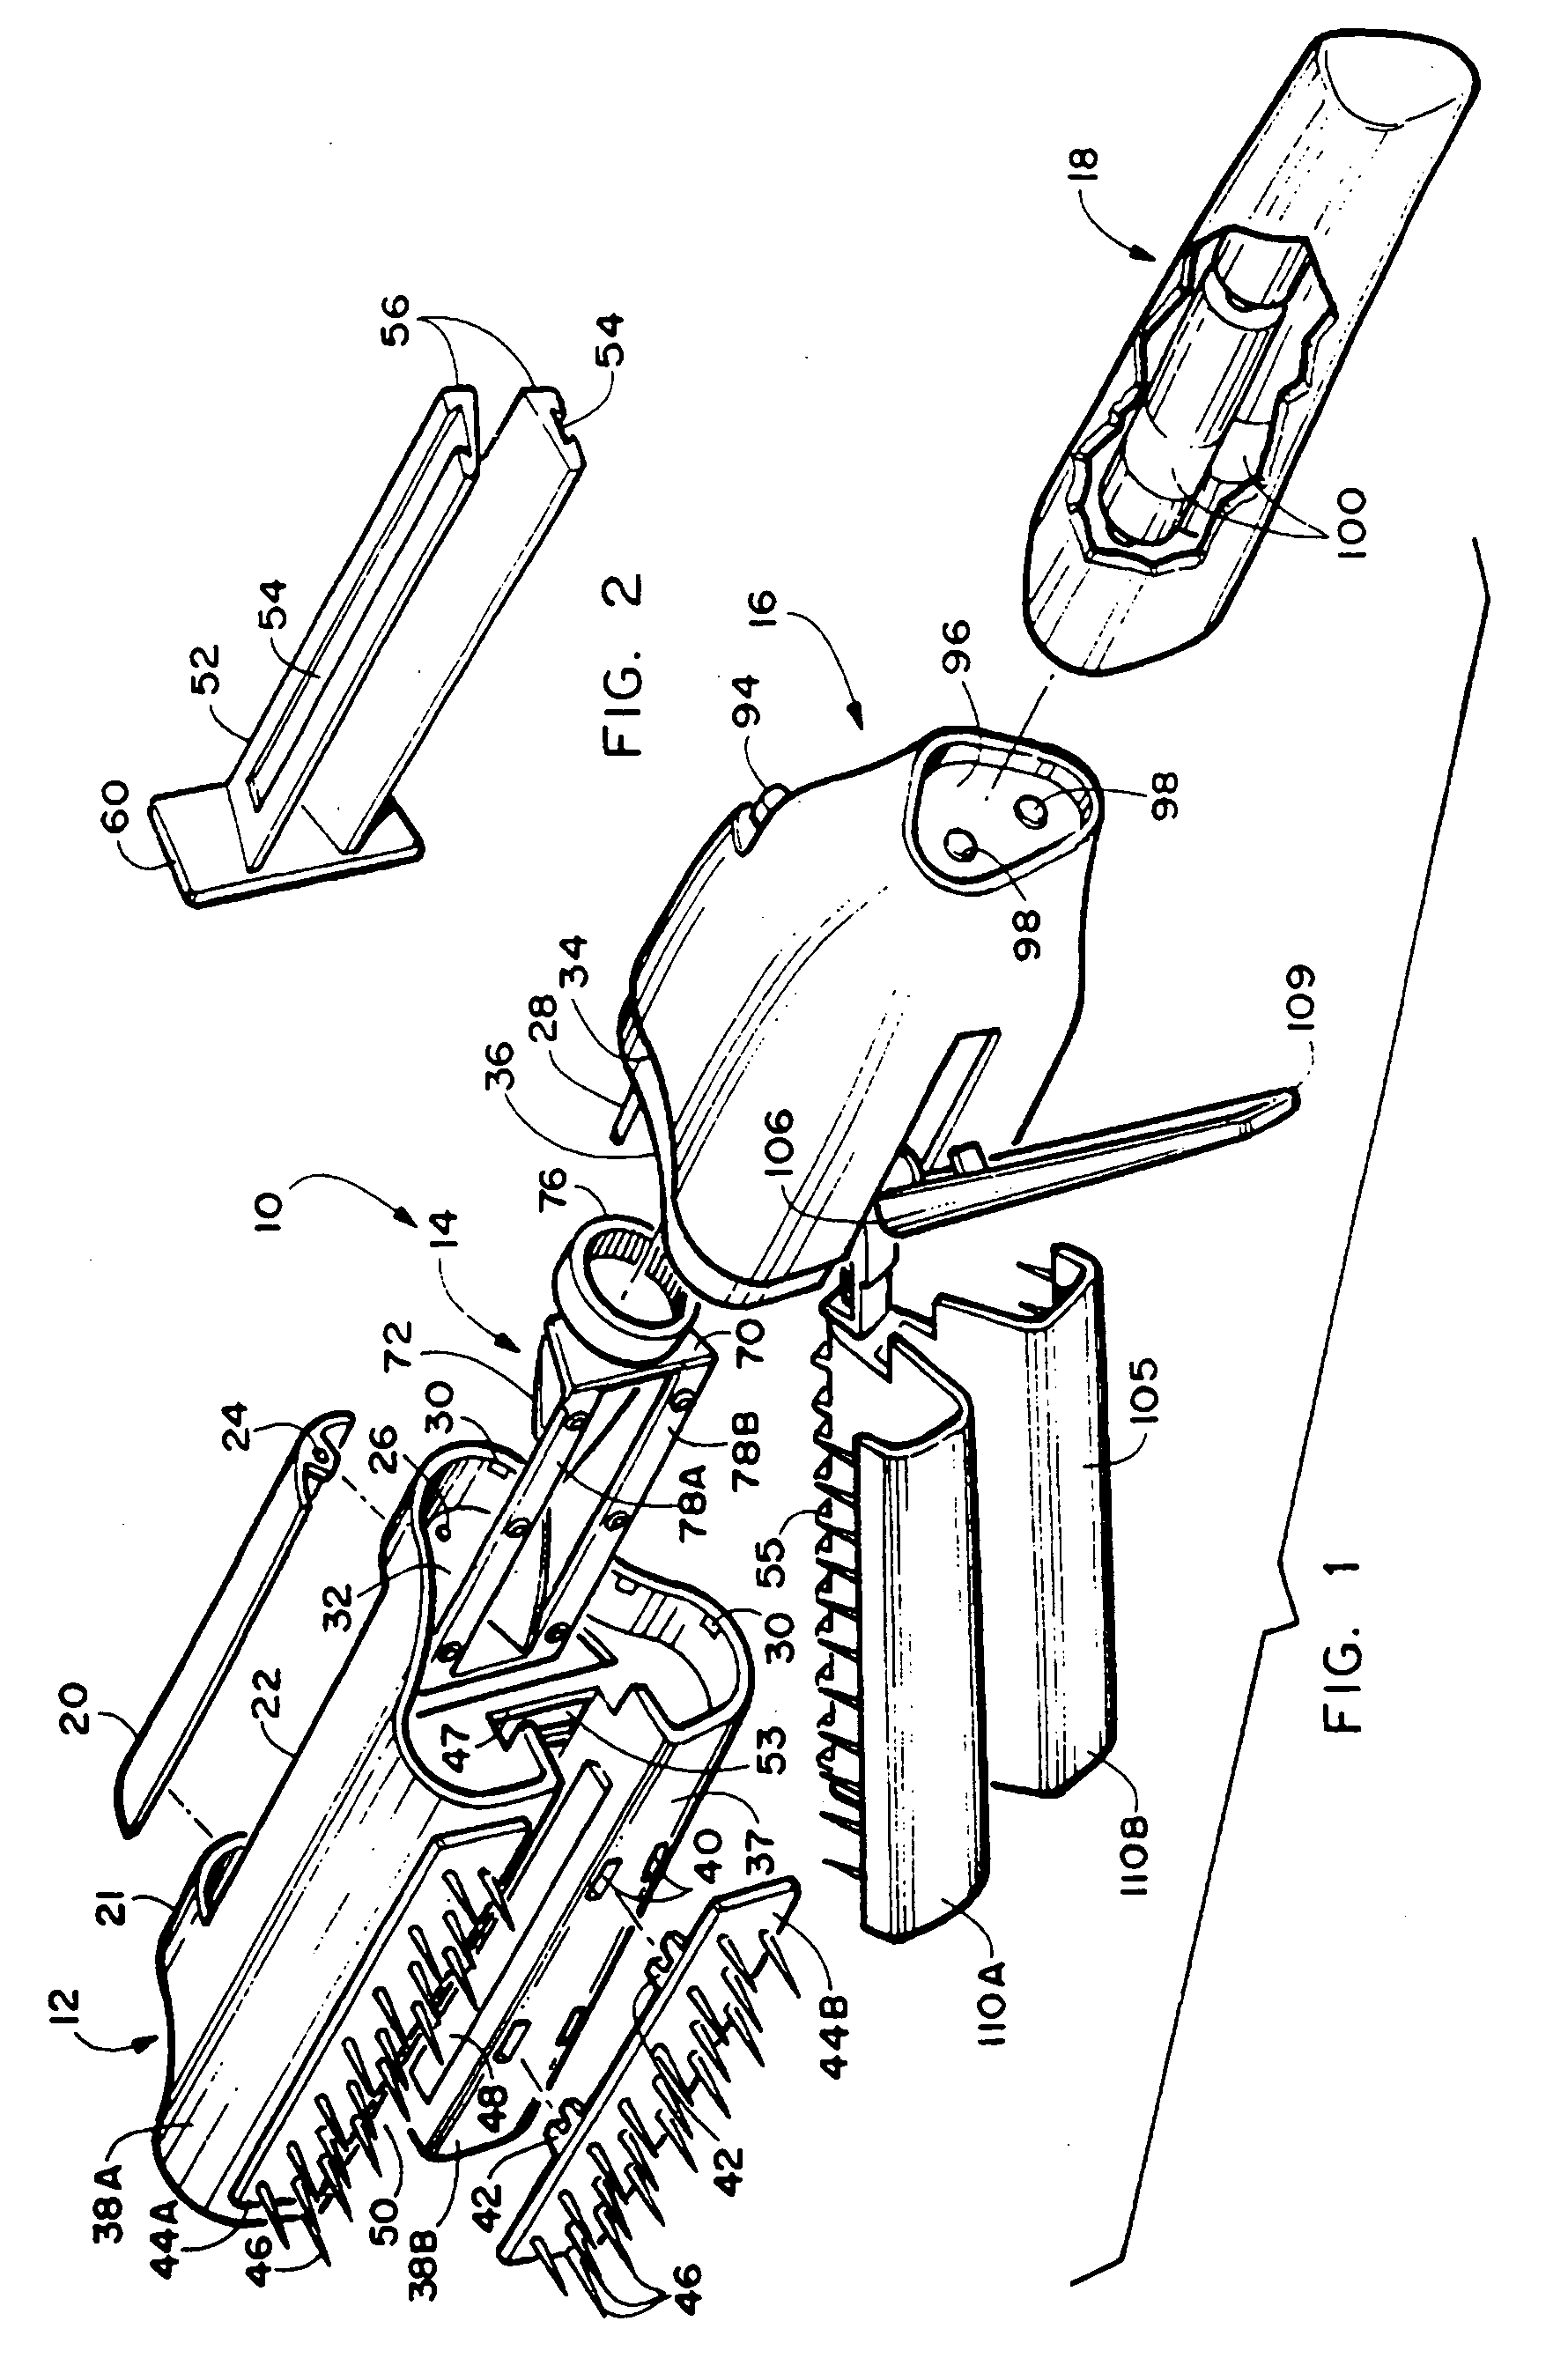 Hair trimming device with removably mountable components for removal of split ends and styling of hair